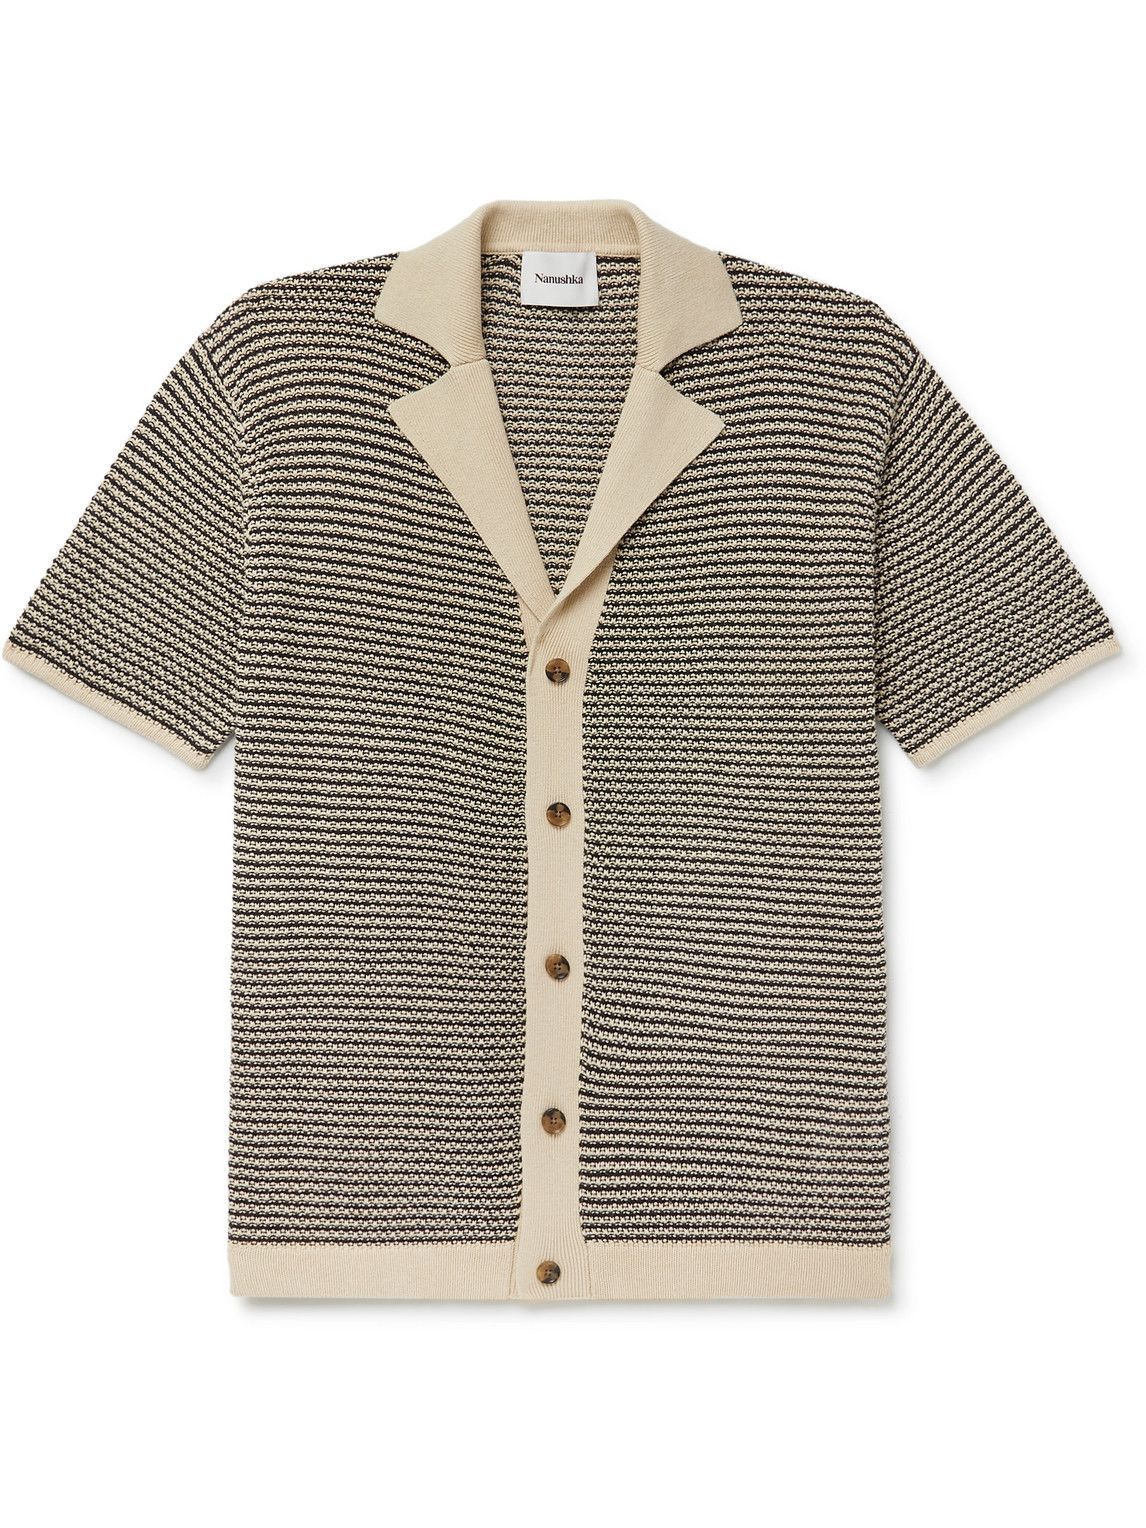 Nanushka - Knox Camp-Collar Striped Knitted Linen and Cotton-Blend 